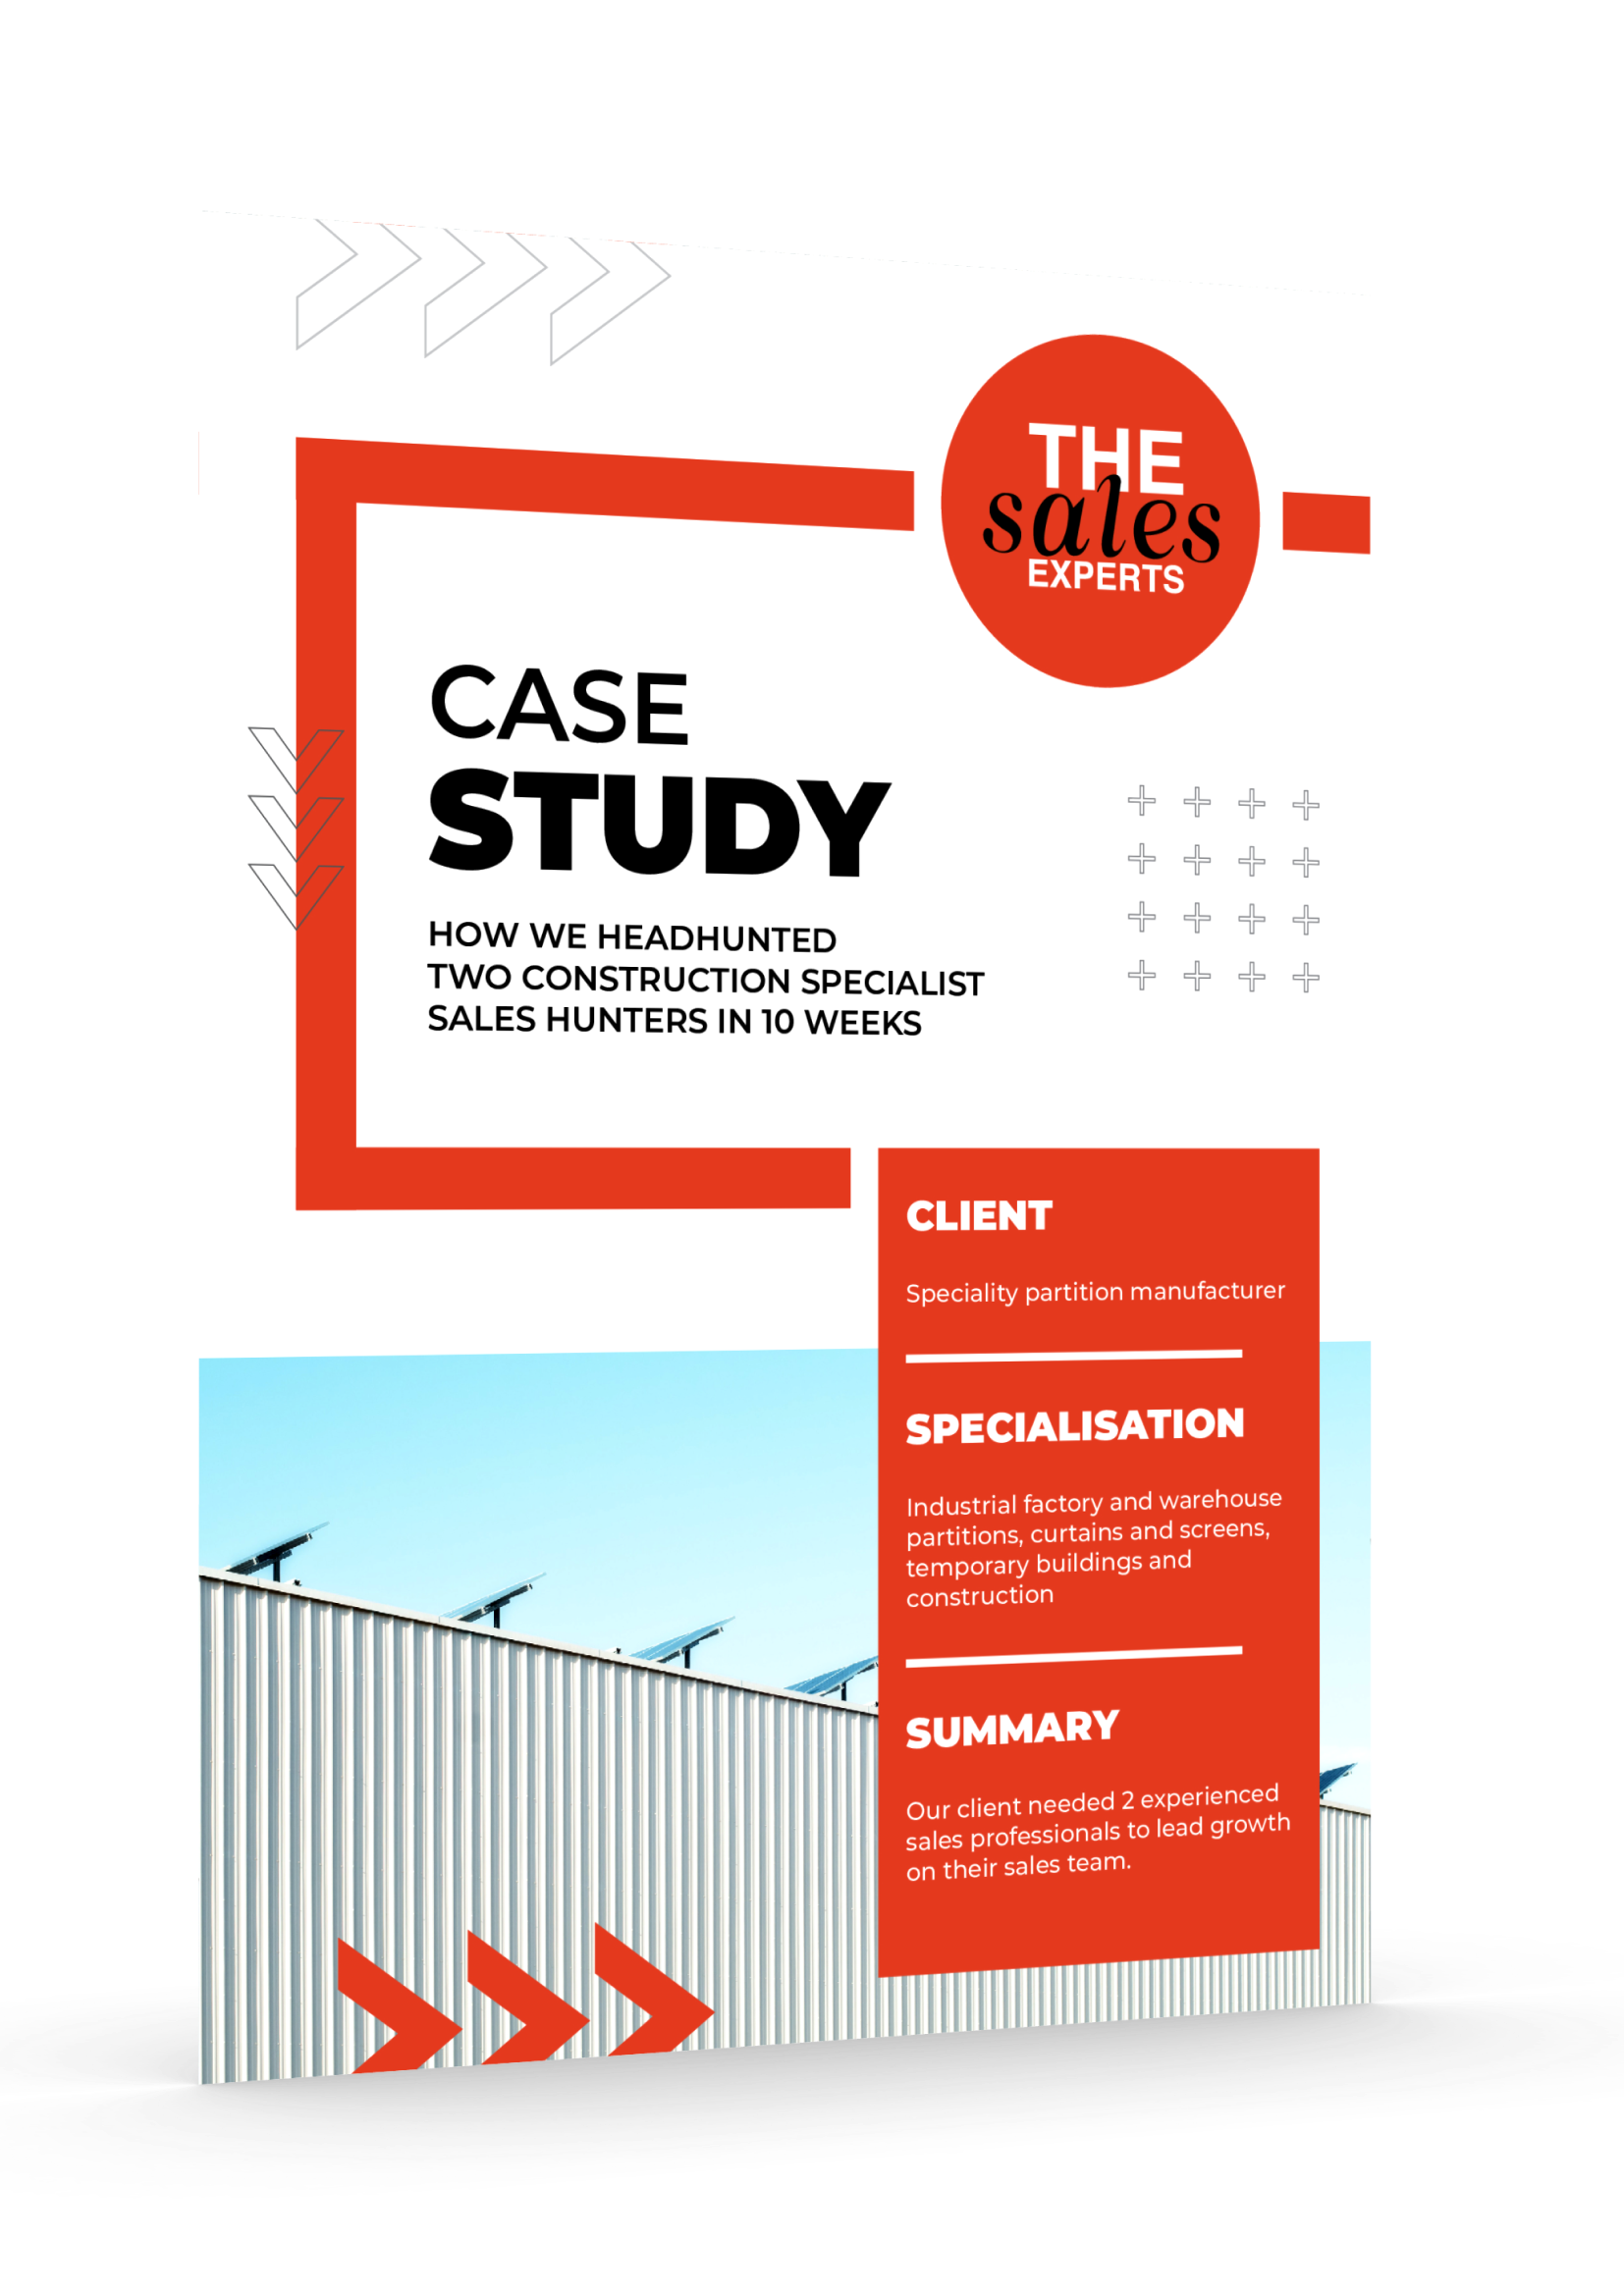 Case study – Sales Recruitment in Construction Industry